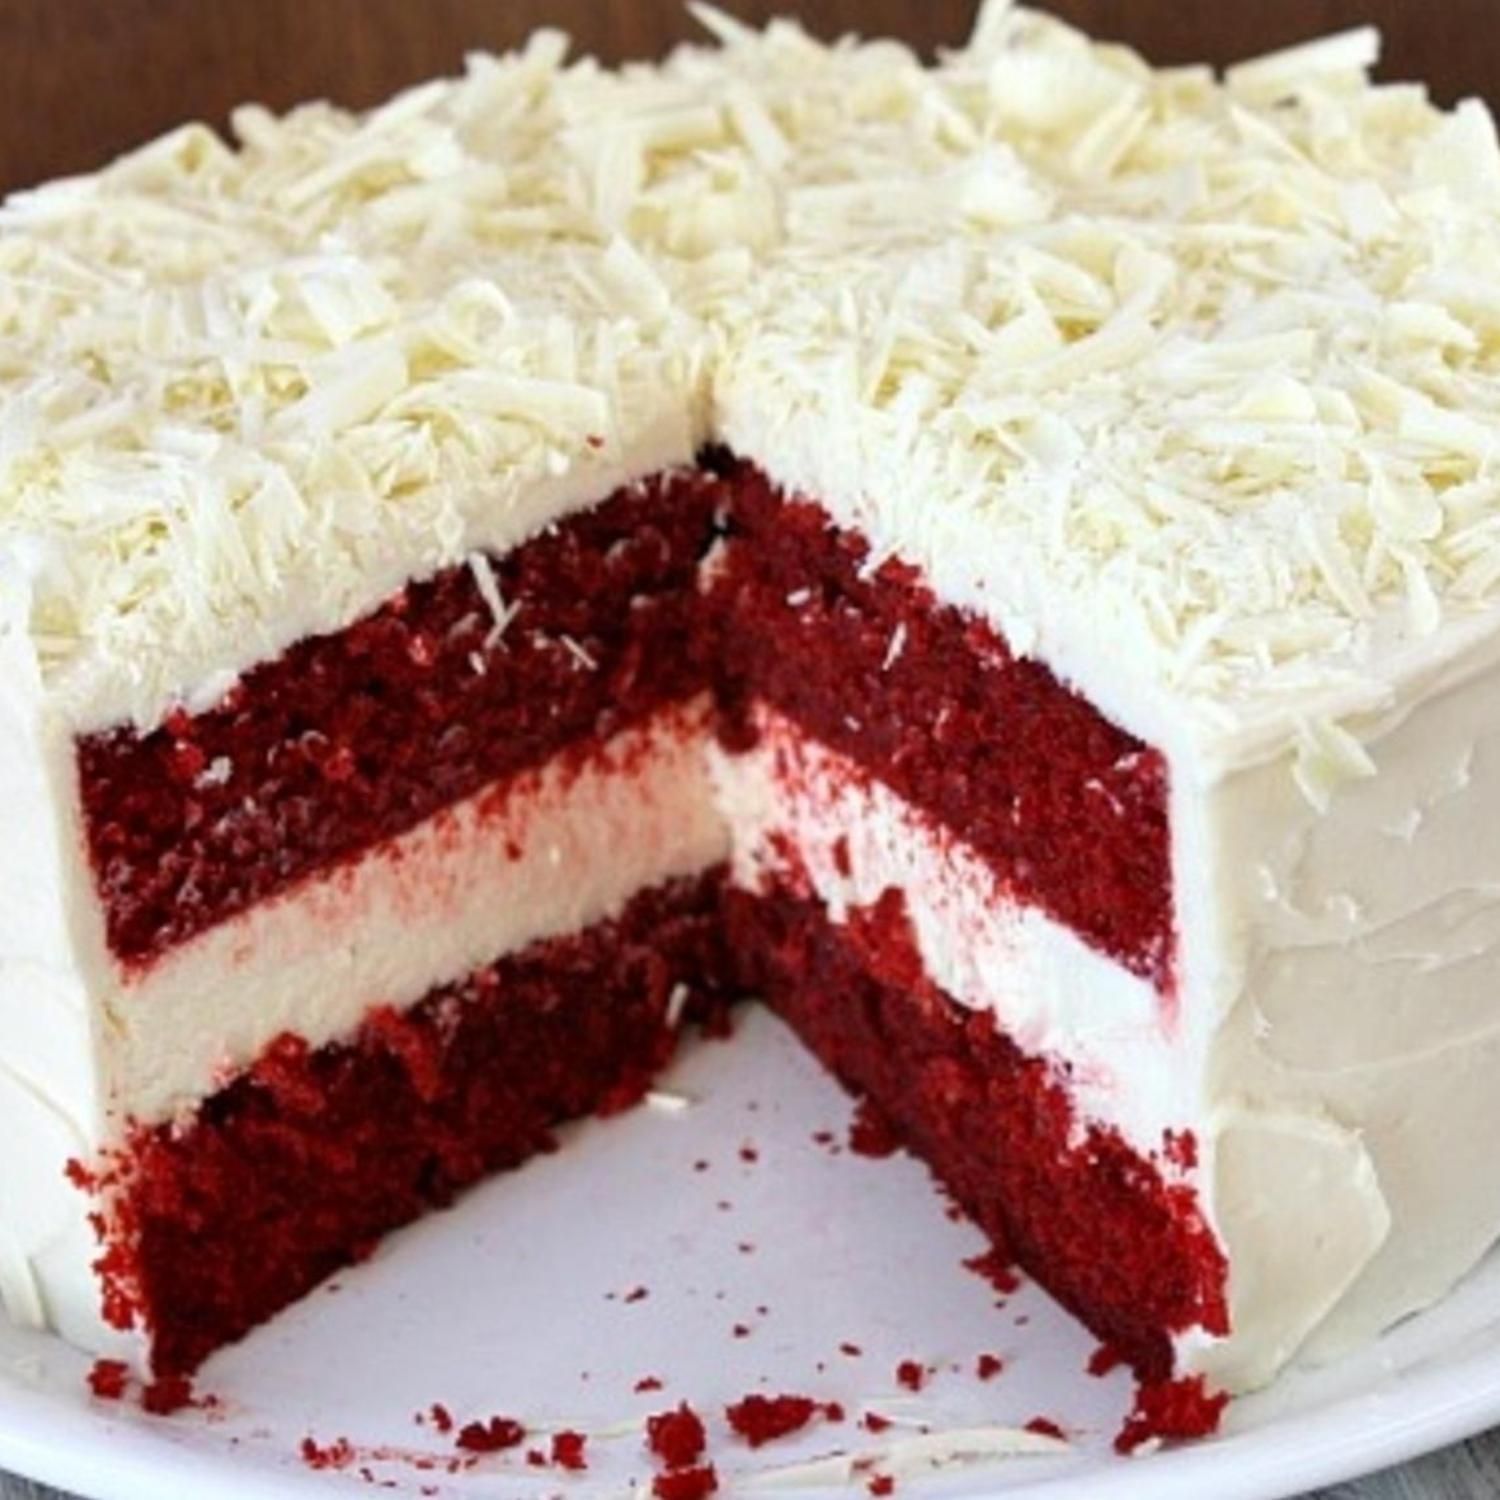 If you’ve ever been to The Cheesecake Factory, and if you’re a Red Velvet Cake Fan… you’ve probably ordered up the Red Velvet Cheesecake Cake. It’s kind of the most amazing thing ever… a red velvet layer-cake with a layers of cheesecake mixed in… topped with cream cheese icing.This recipe has a few steps to it, but it's all worth it in the end! It's easiest to make the cheesecake layer one day and then assemble the rest of the cake the next. -   23 red velvet cheesecake recipes
 ideas